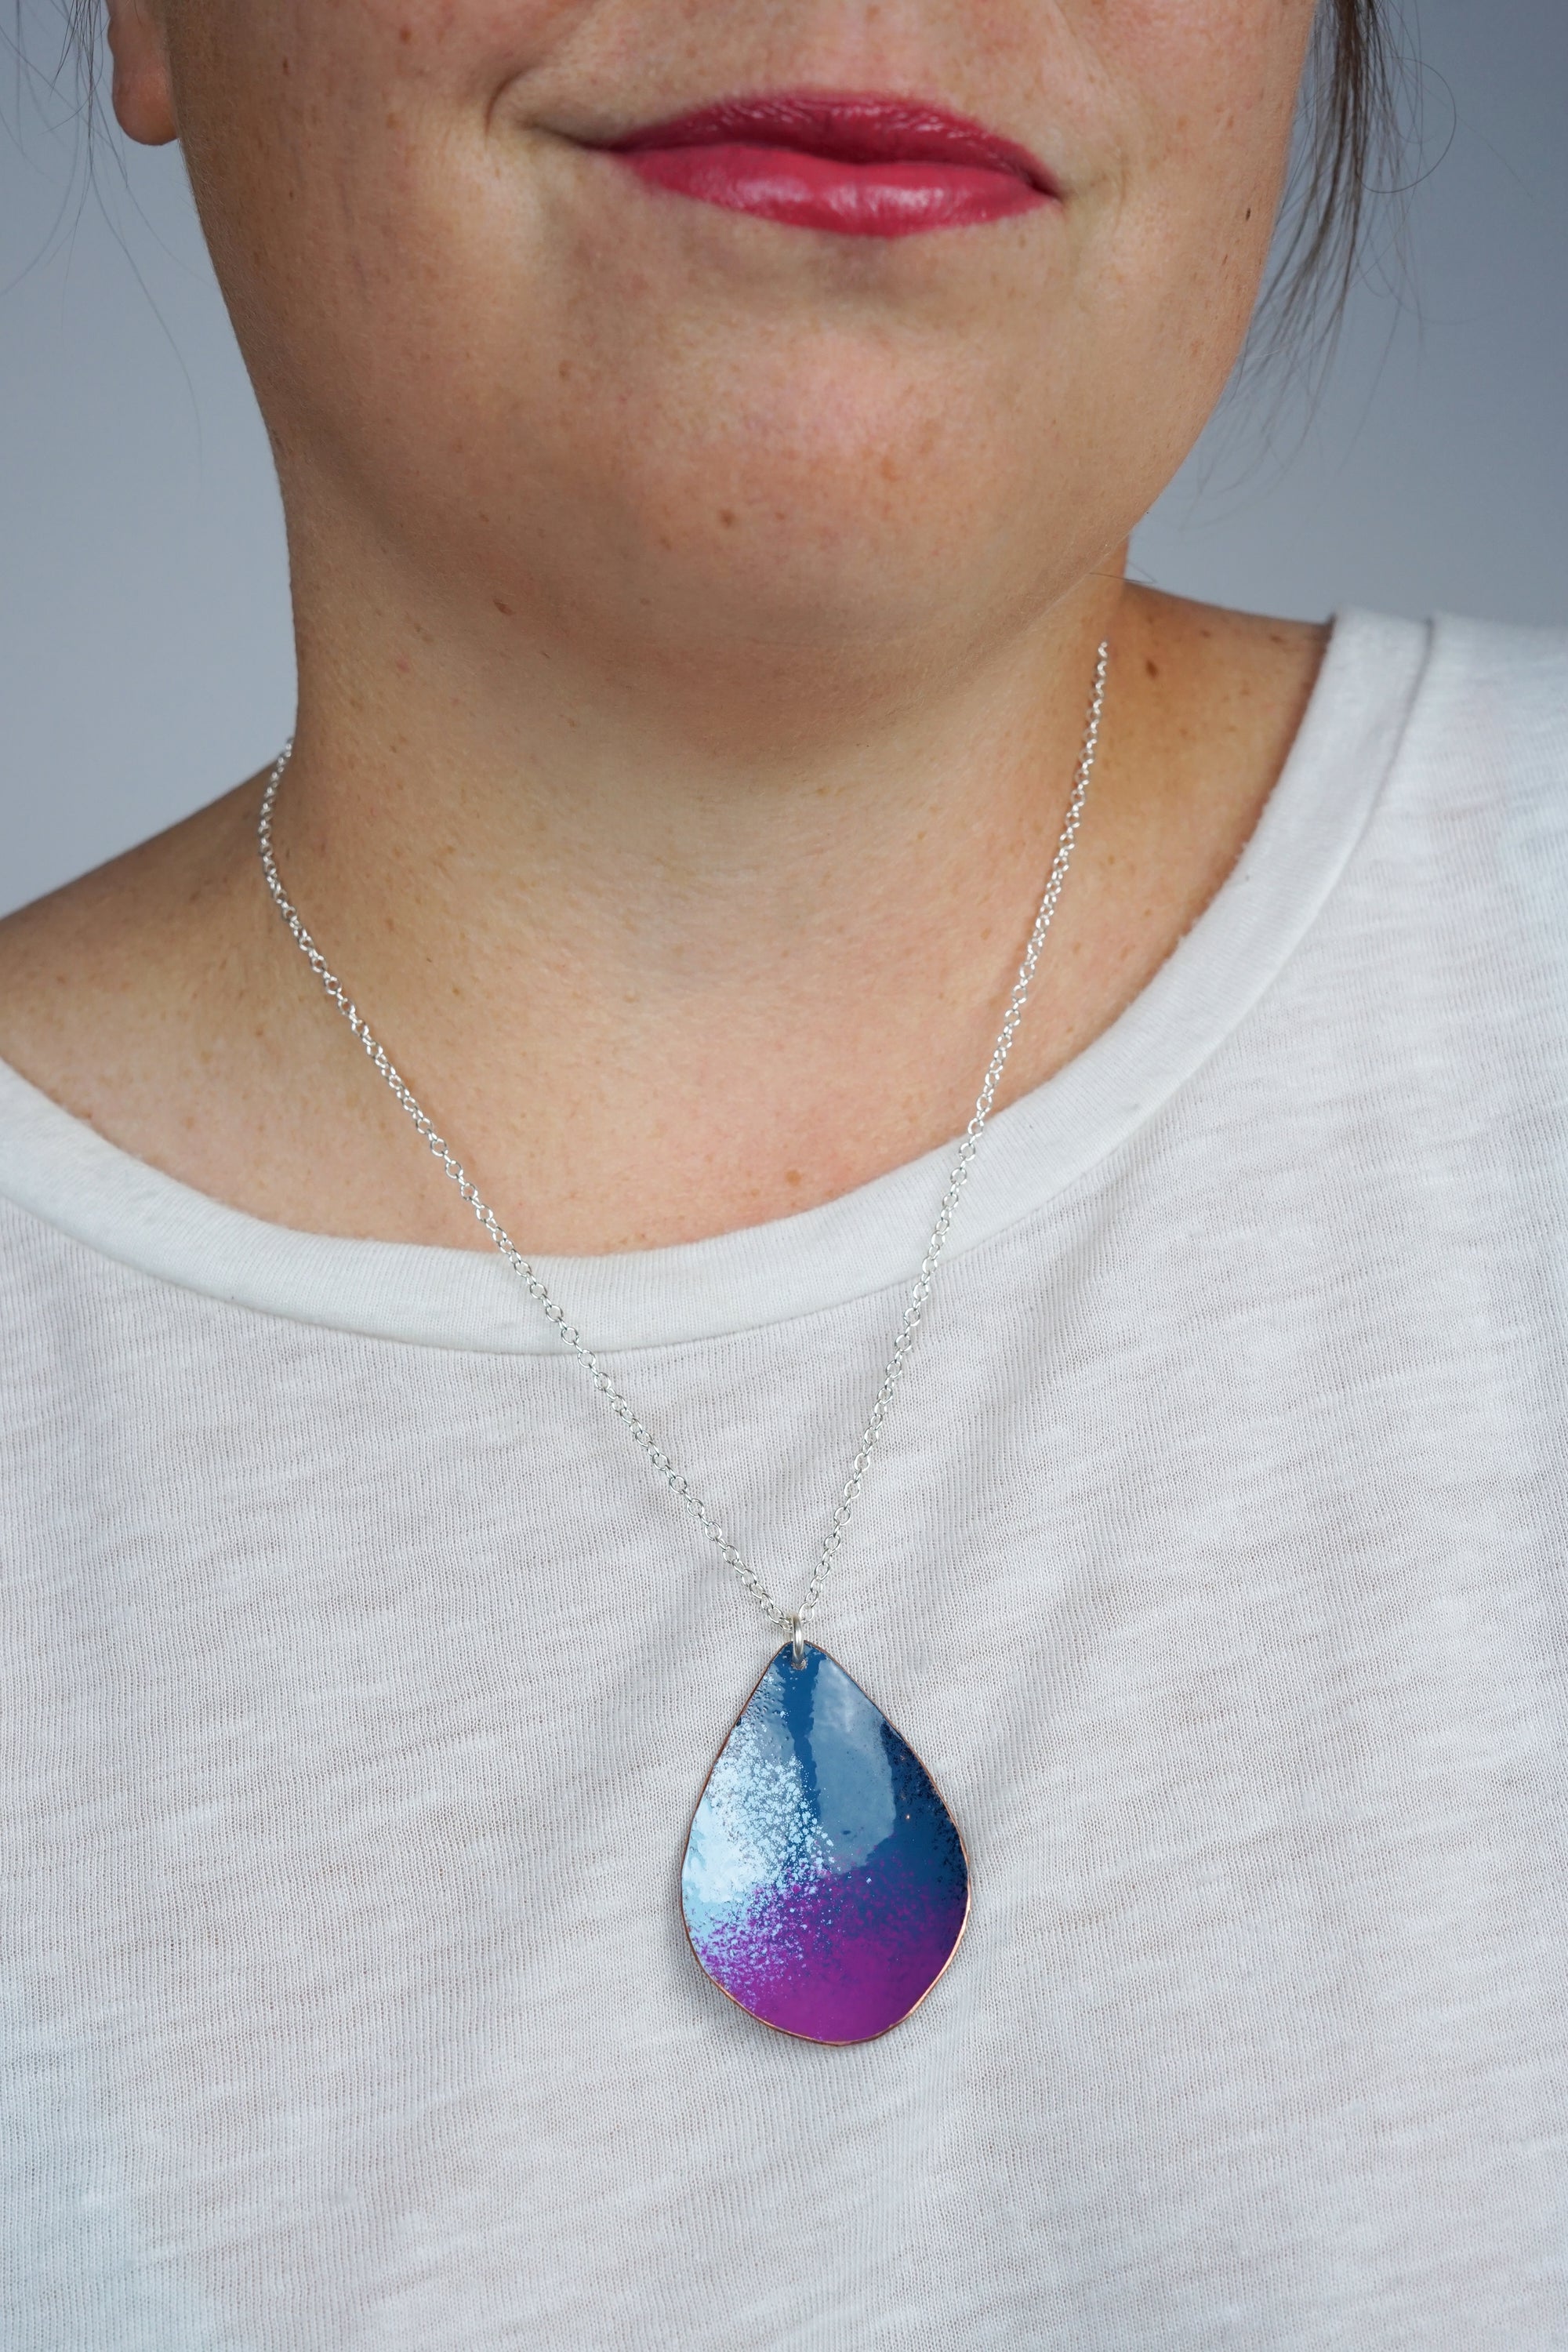 Chroma Pendant in Azure Blue, Light Blue, and Radiant Orchid